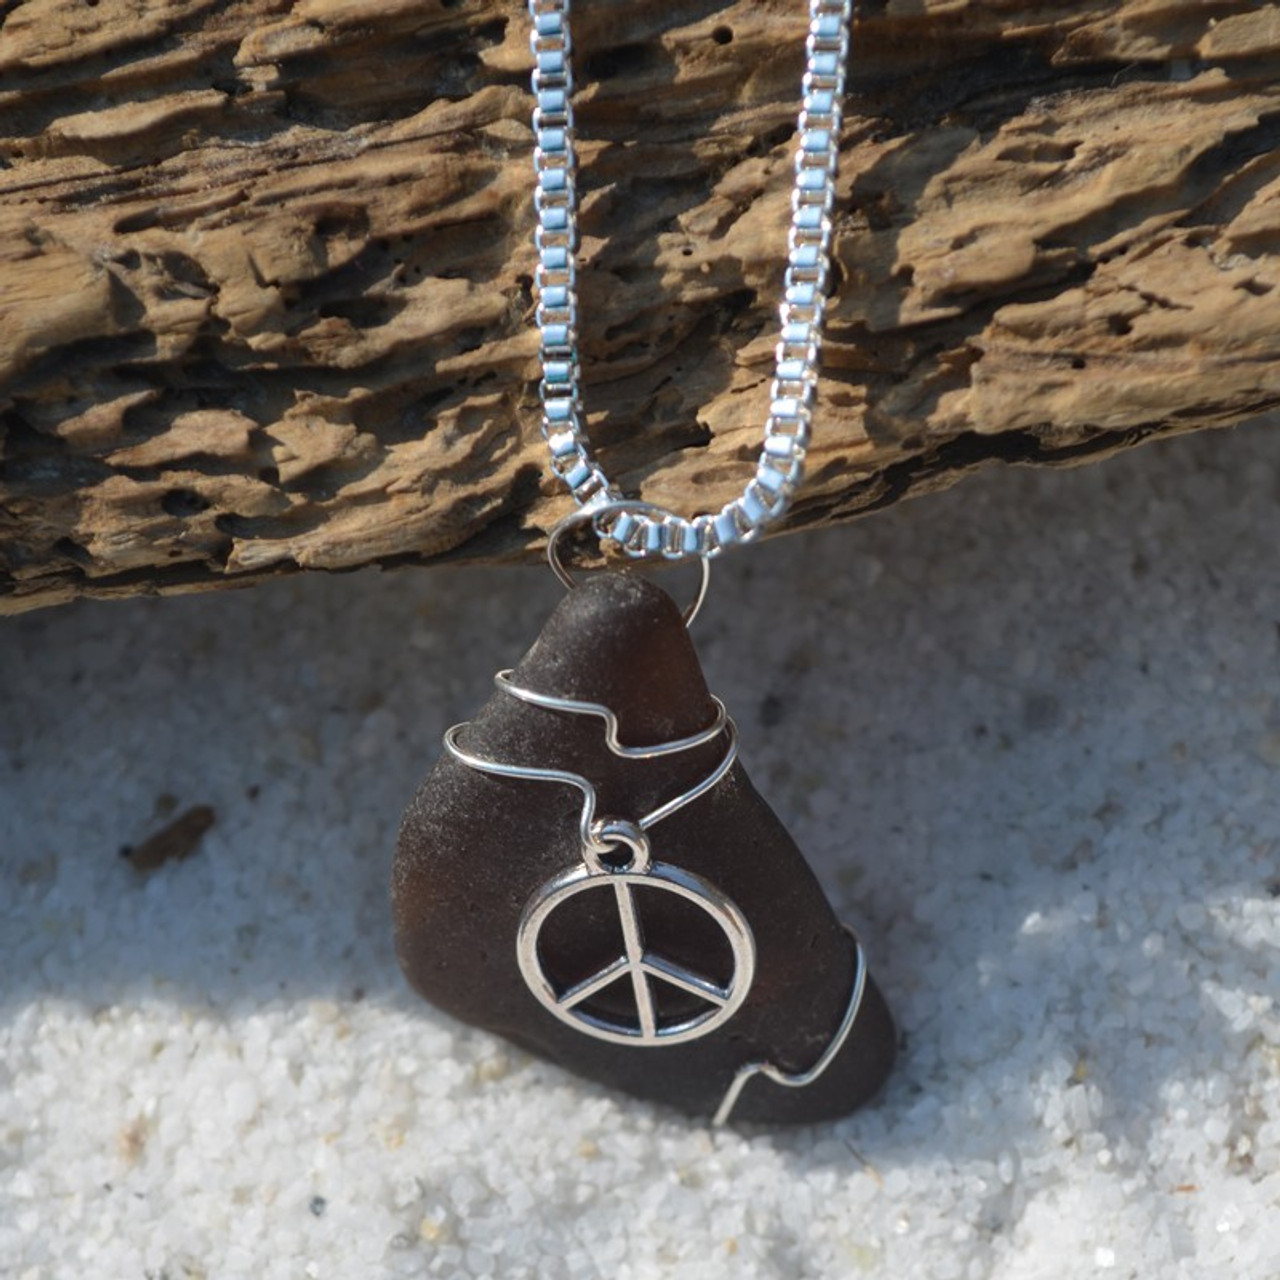 Custom Handmade Genuine Sea Glass Necklace with a Silver Peace Symbol Charm - Choose the Color - Frosted, Green, Brown, or Aqua